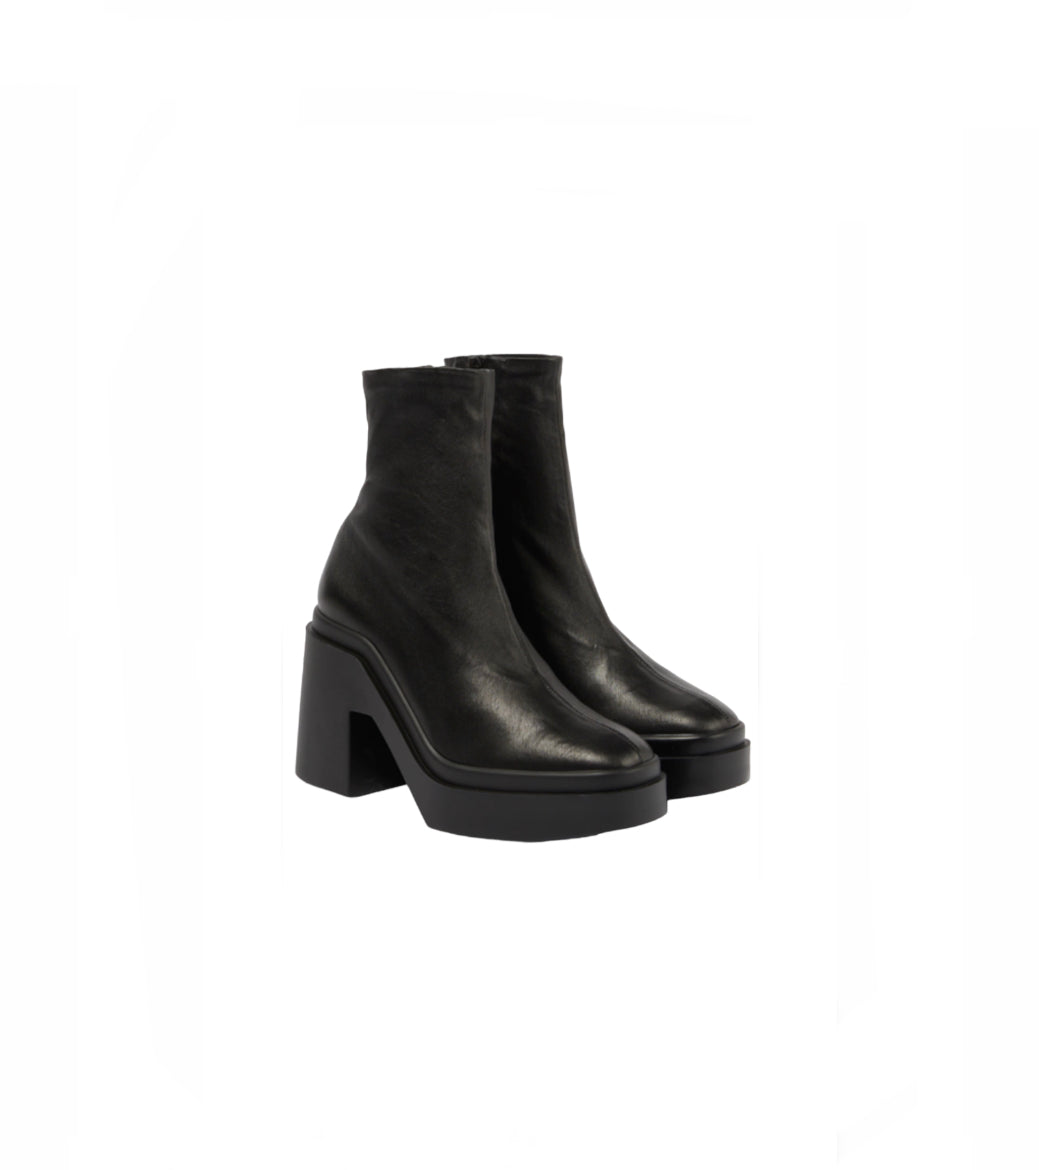 Robert Clergerie Nina Ankle Boots - new